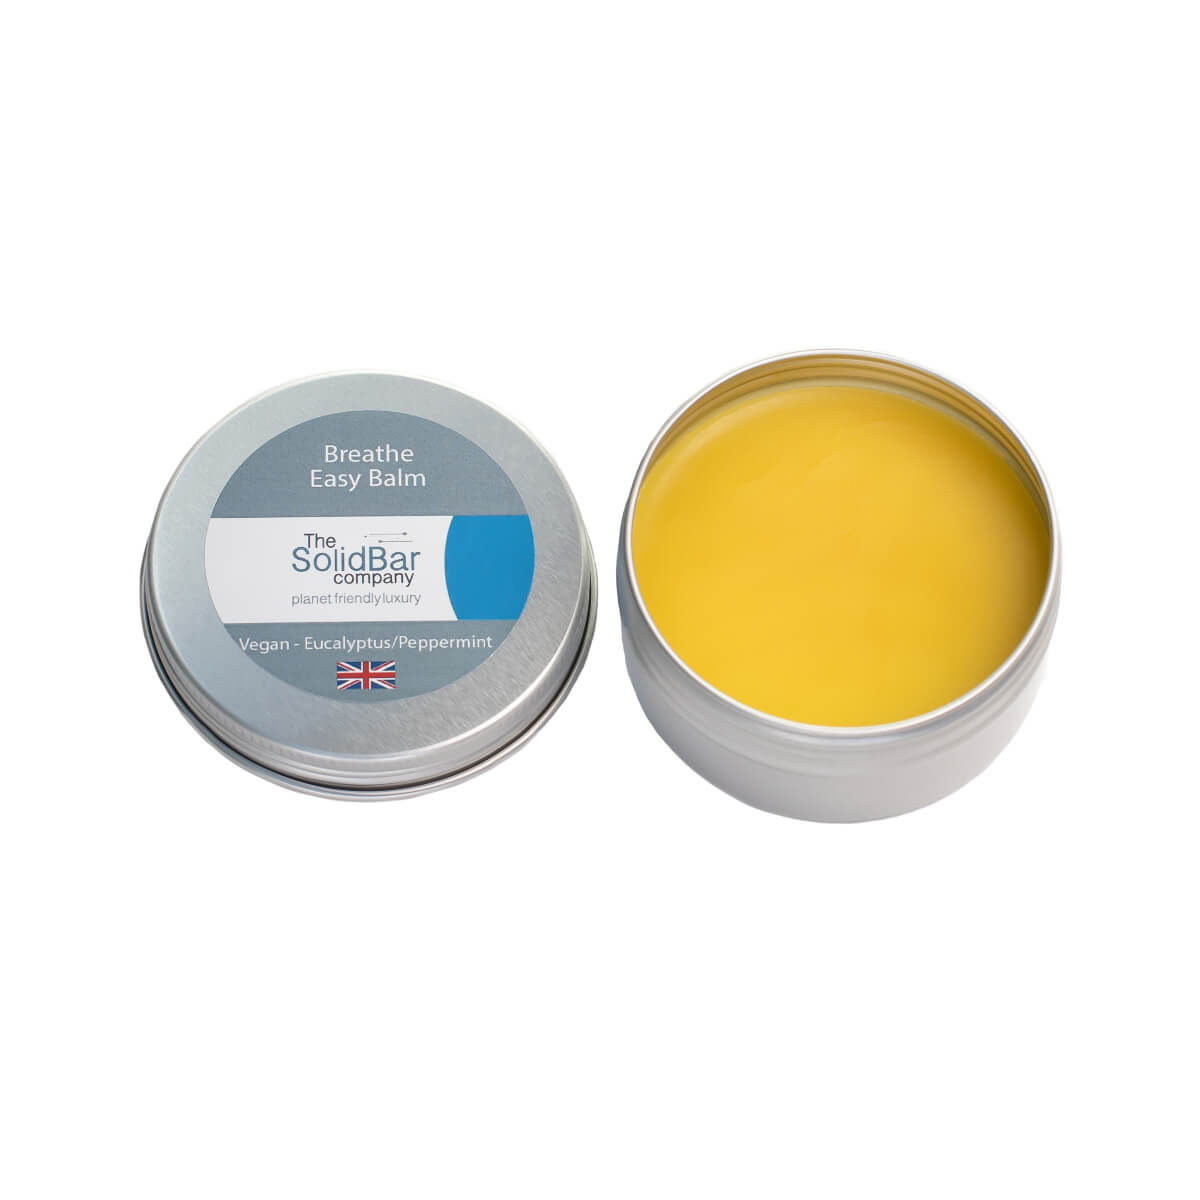 Breathe Easy Balm at The Solid Bar Company plus new label